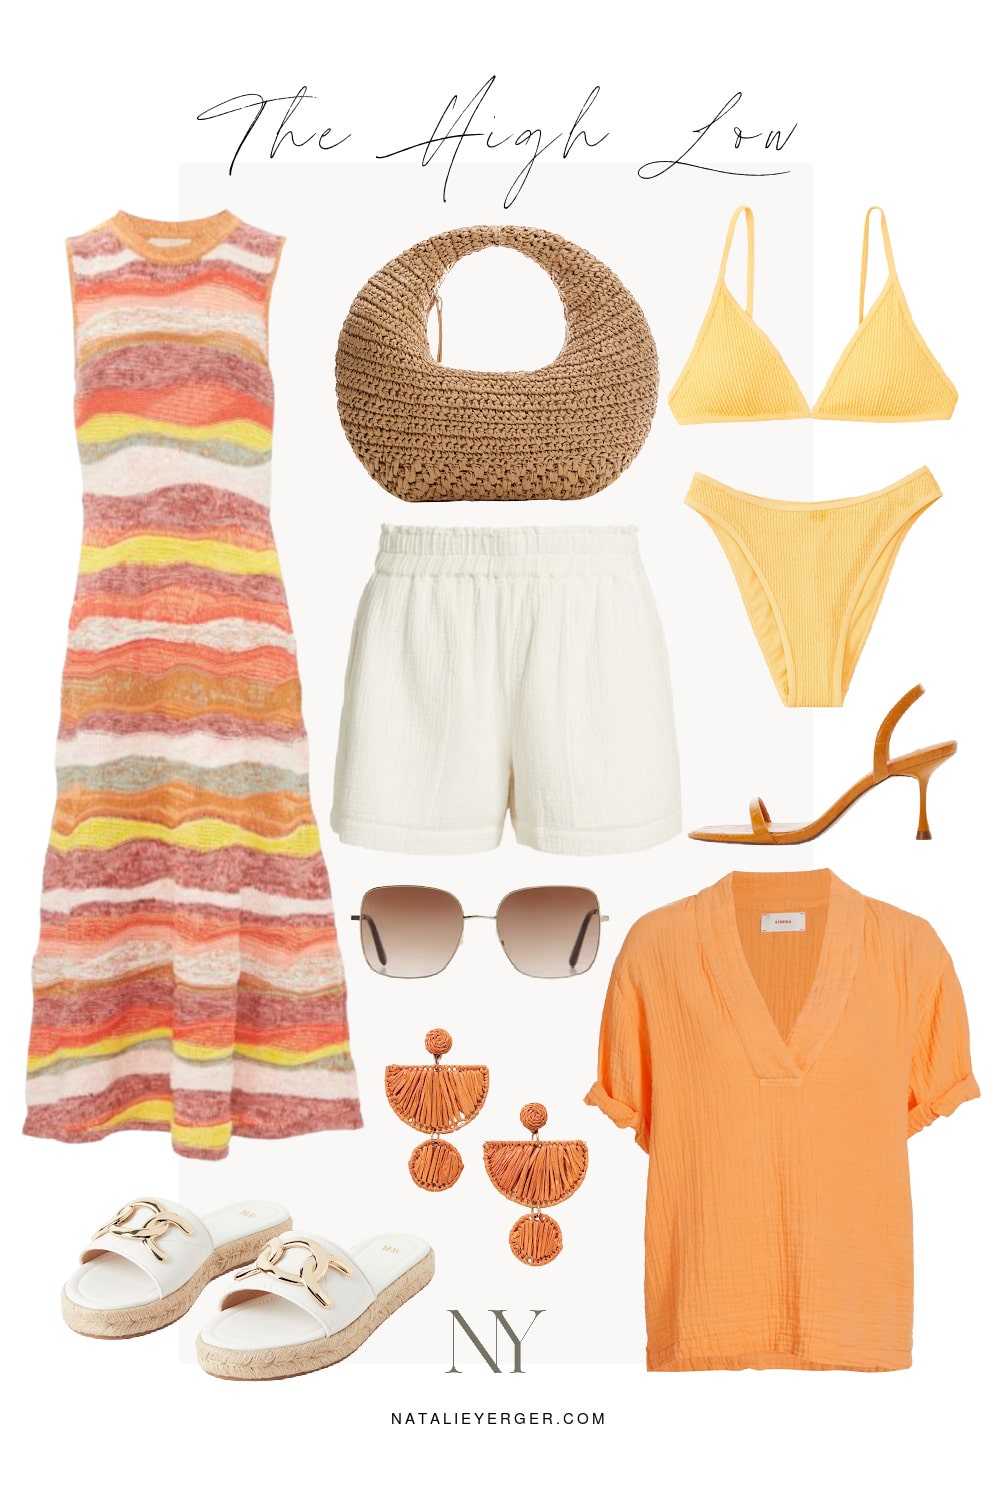 Ulla Johnson Gaia Wavy Knit Maxi Dress with Abercrombie Swimsuit and Summer Accessories